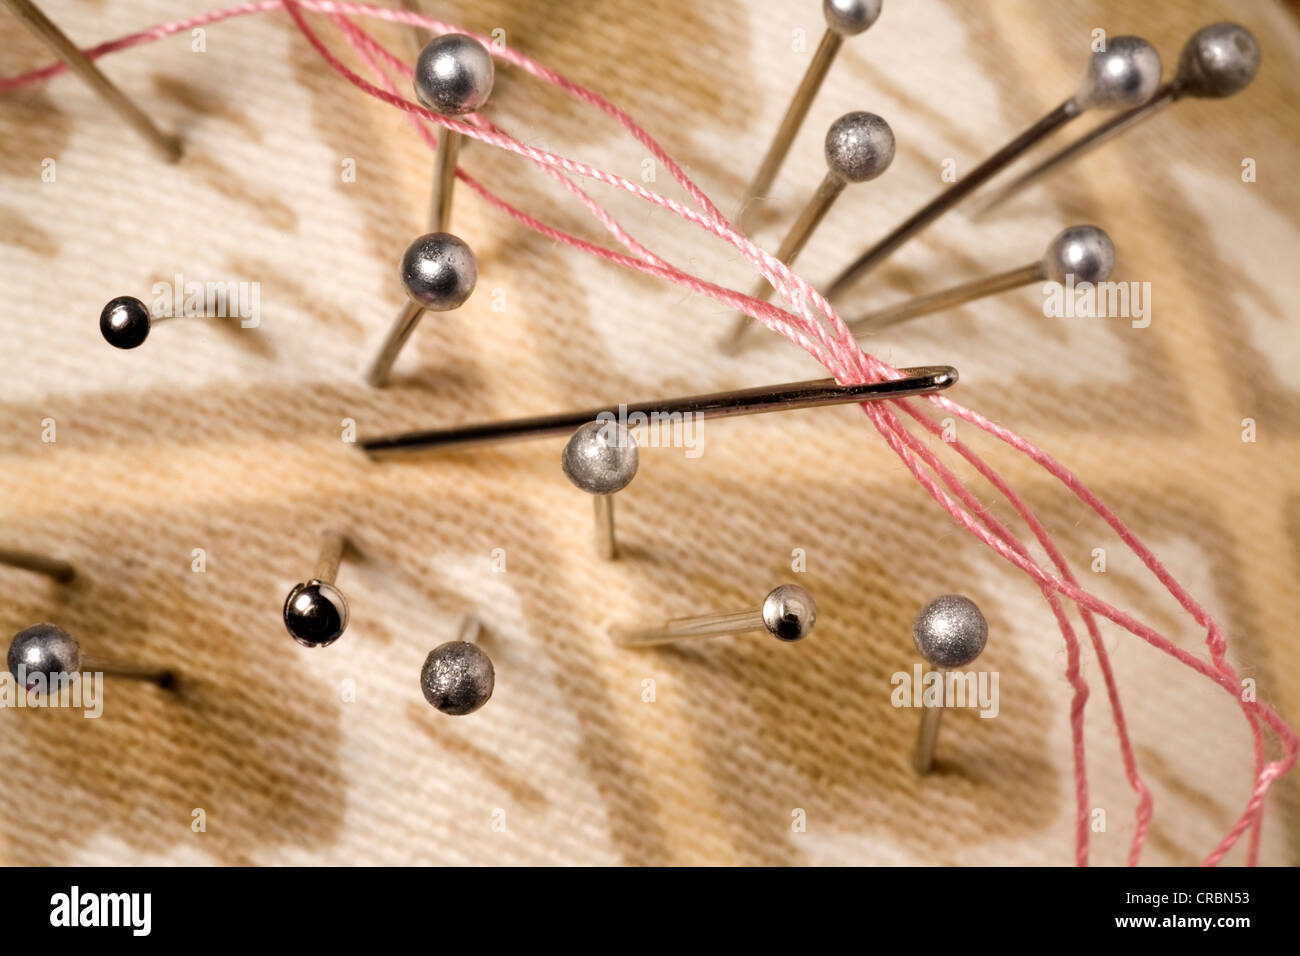 Closeup of pincushion with pins and a needle with multiple threads Stock Photo